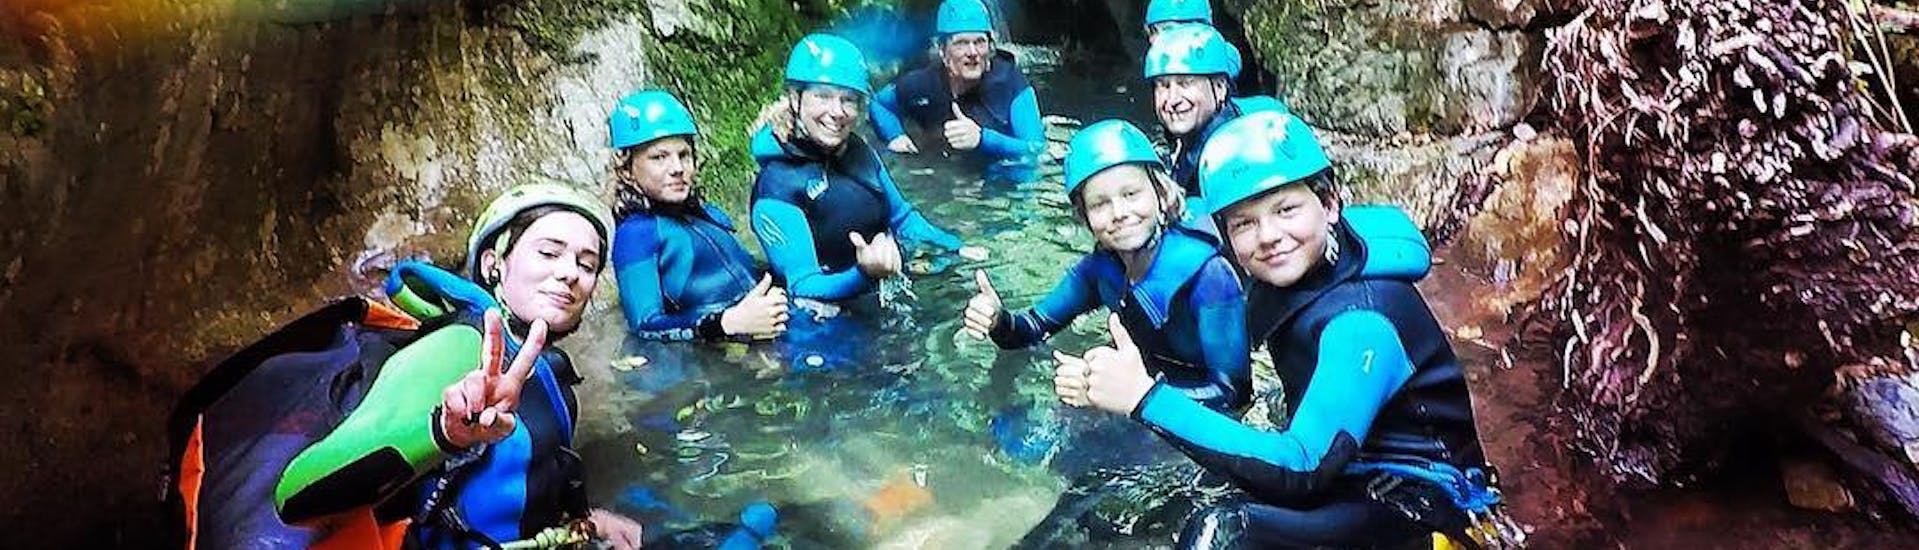 Canyoning in Rio Selvano with Searching Emotions Fabbriche di Vallico - Hero image